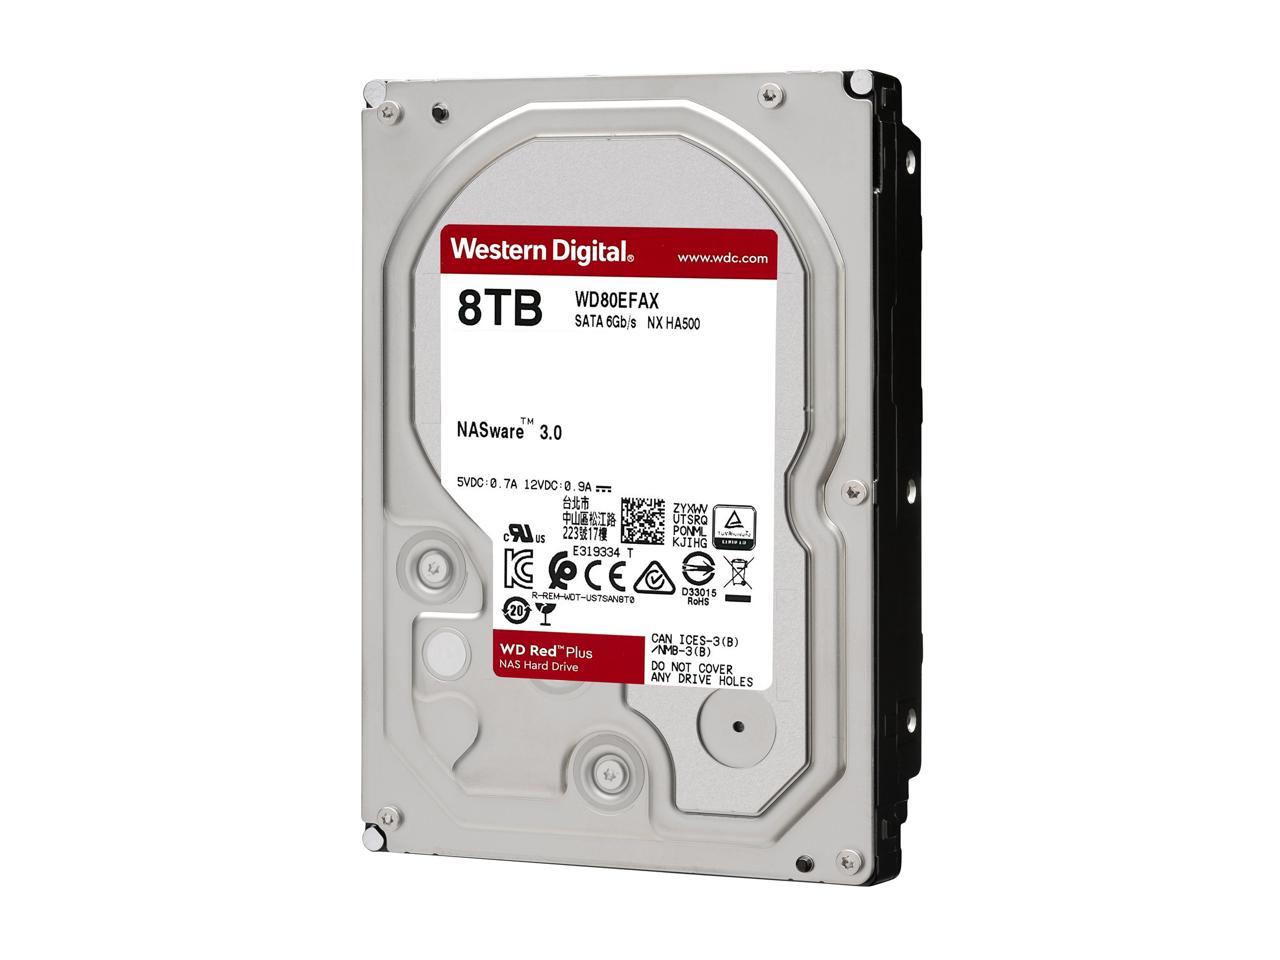 Wd Red Plus 8Tb Nas Hard Disk Drive - 5400 Rpm Class Sata 6Gb/S, Cmr, 256Mb Cache, 3.5 Inch - Wd80Efax